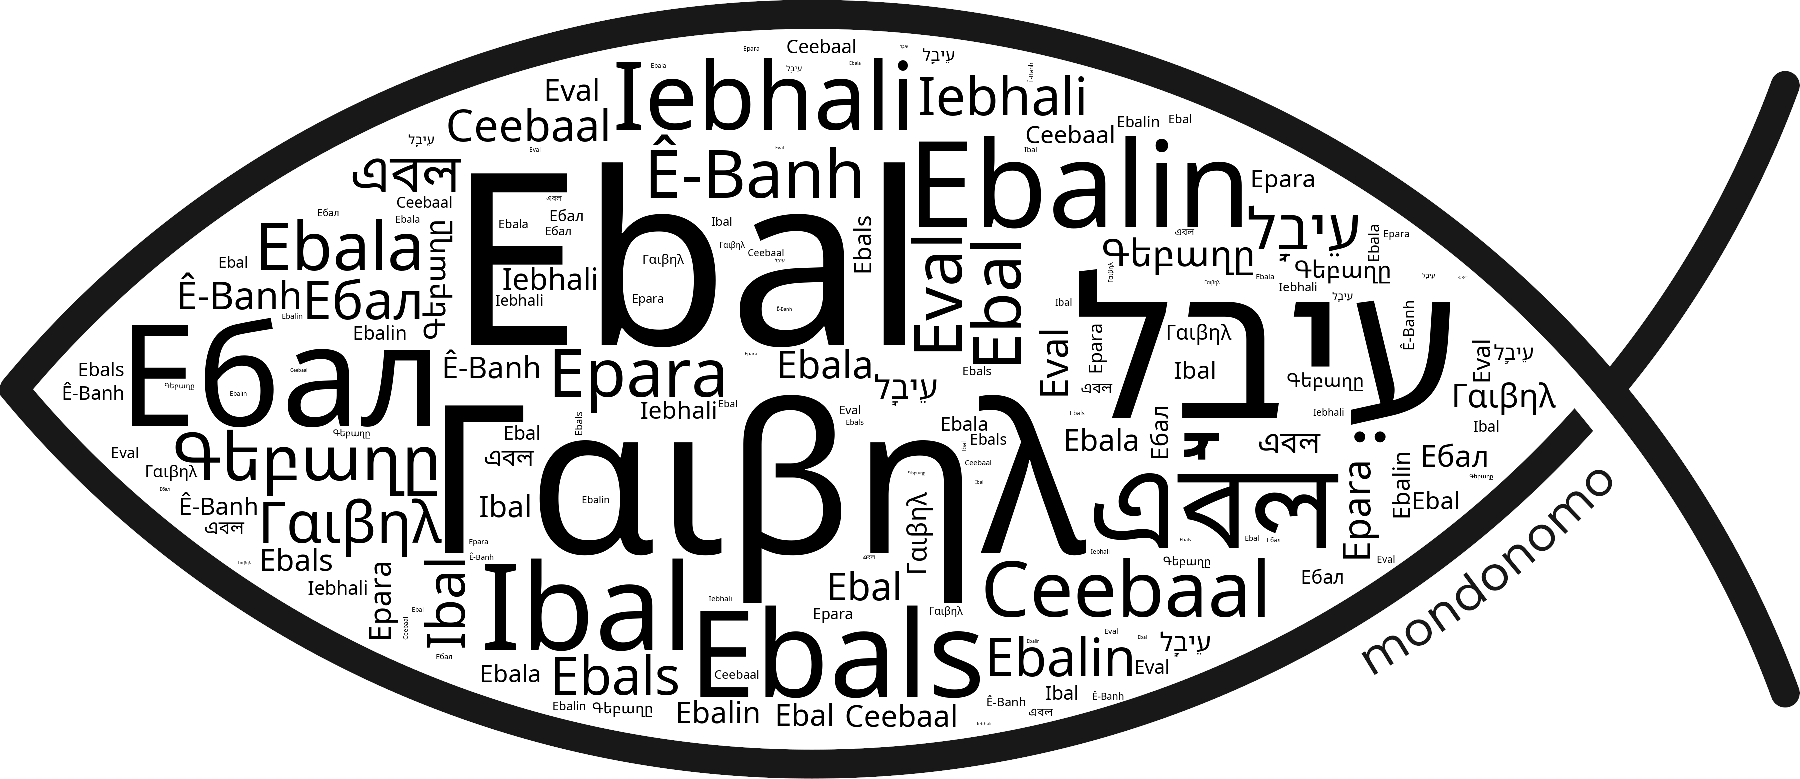 Name Ebal in the world's Bibles